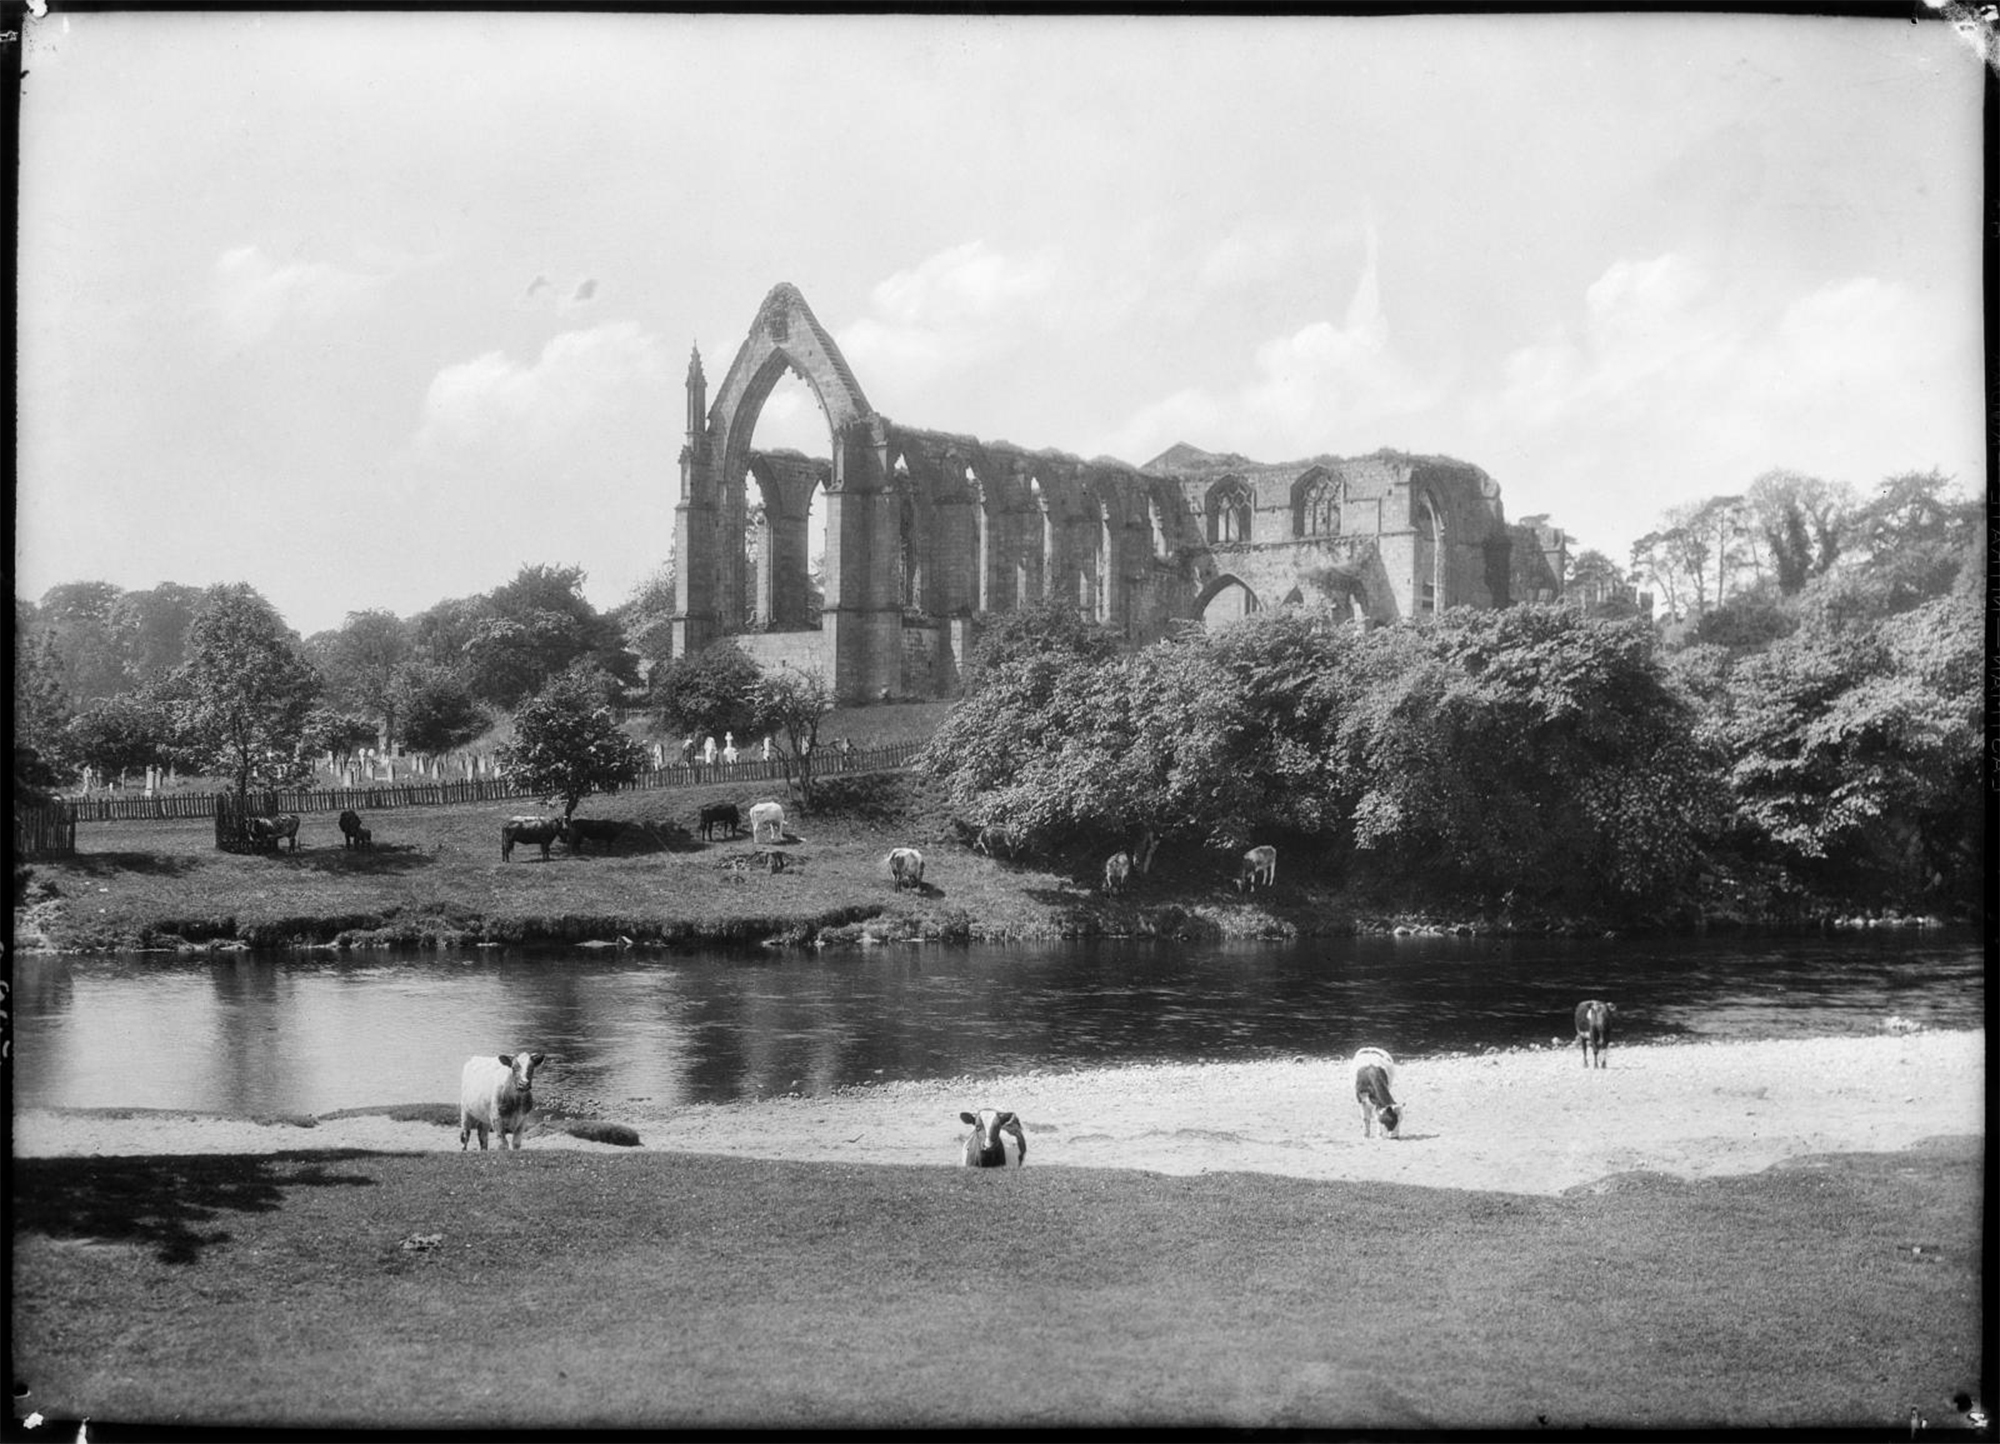 Image of abbey ruins with cows grazing in the surrounding fields